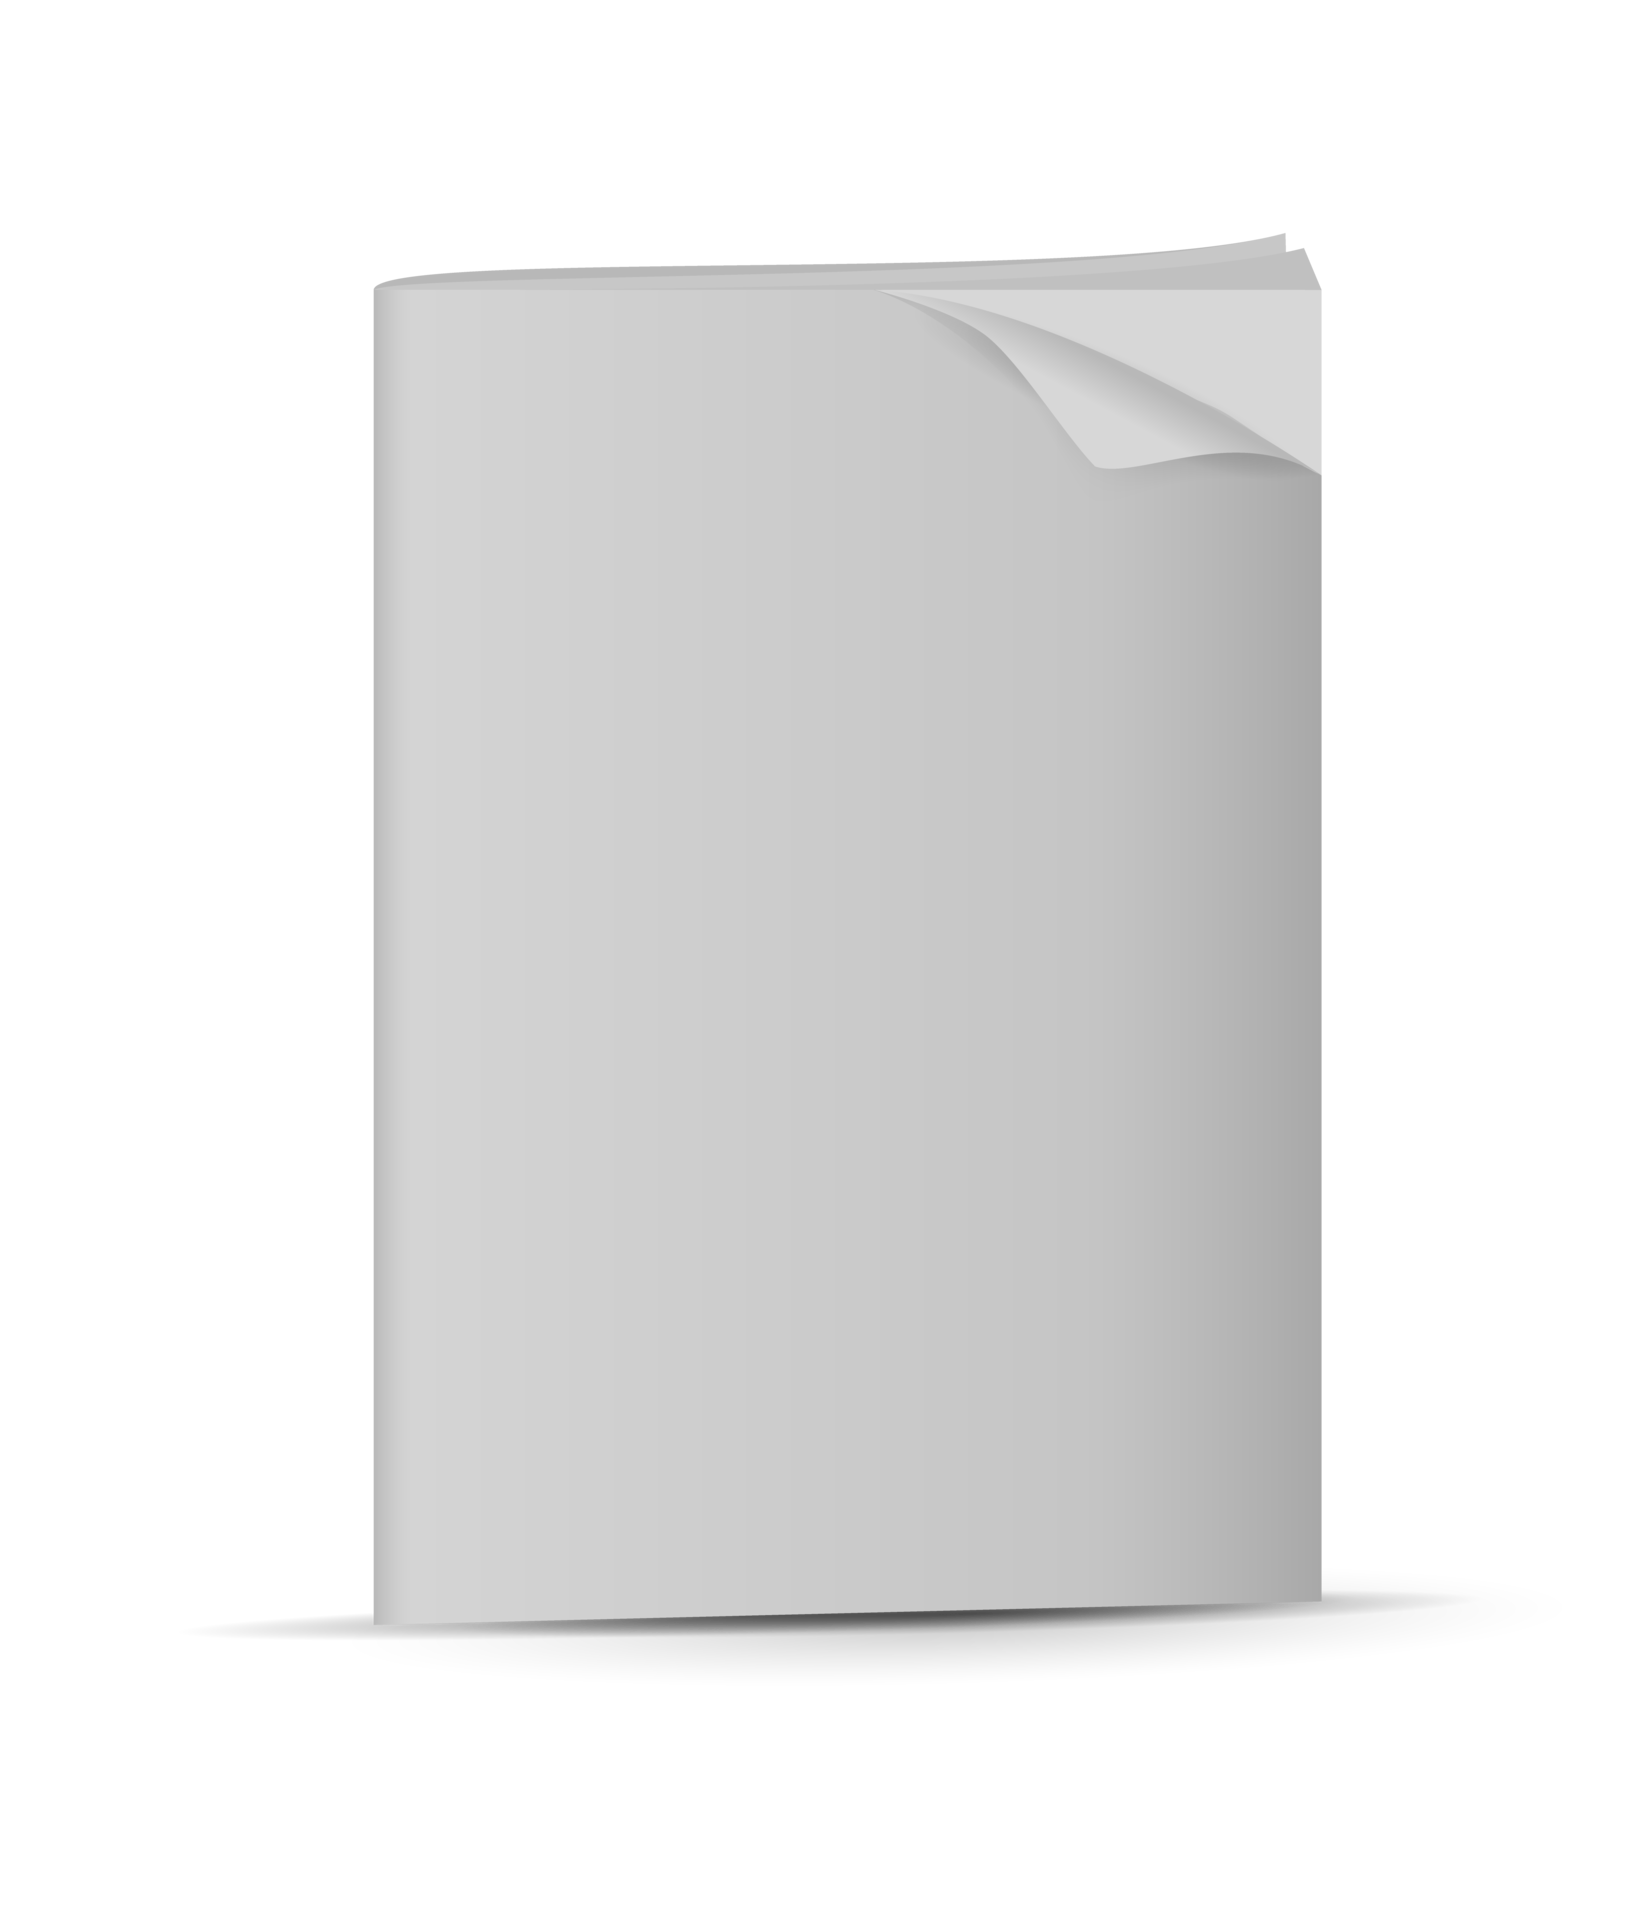 A White Paper With Curled Corner